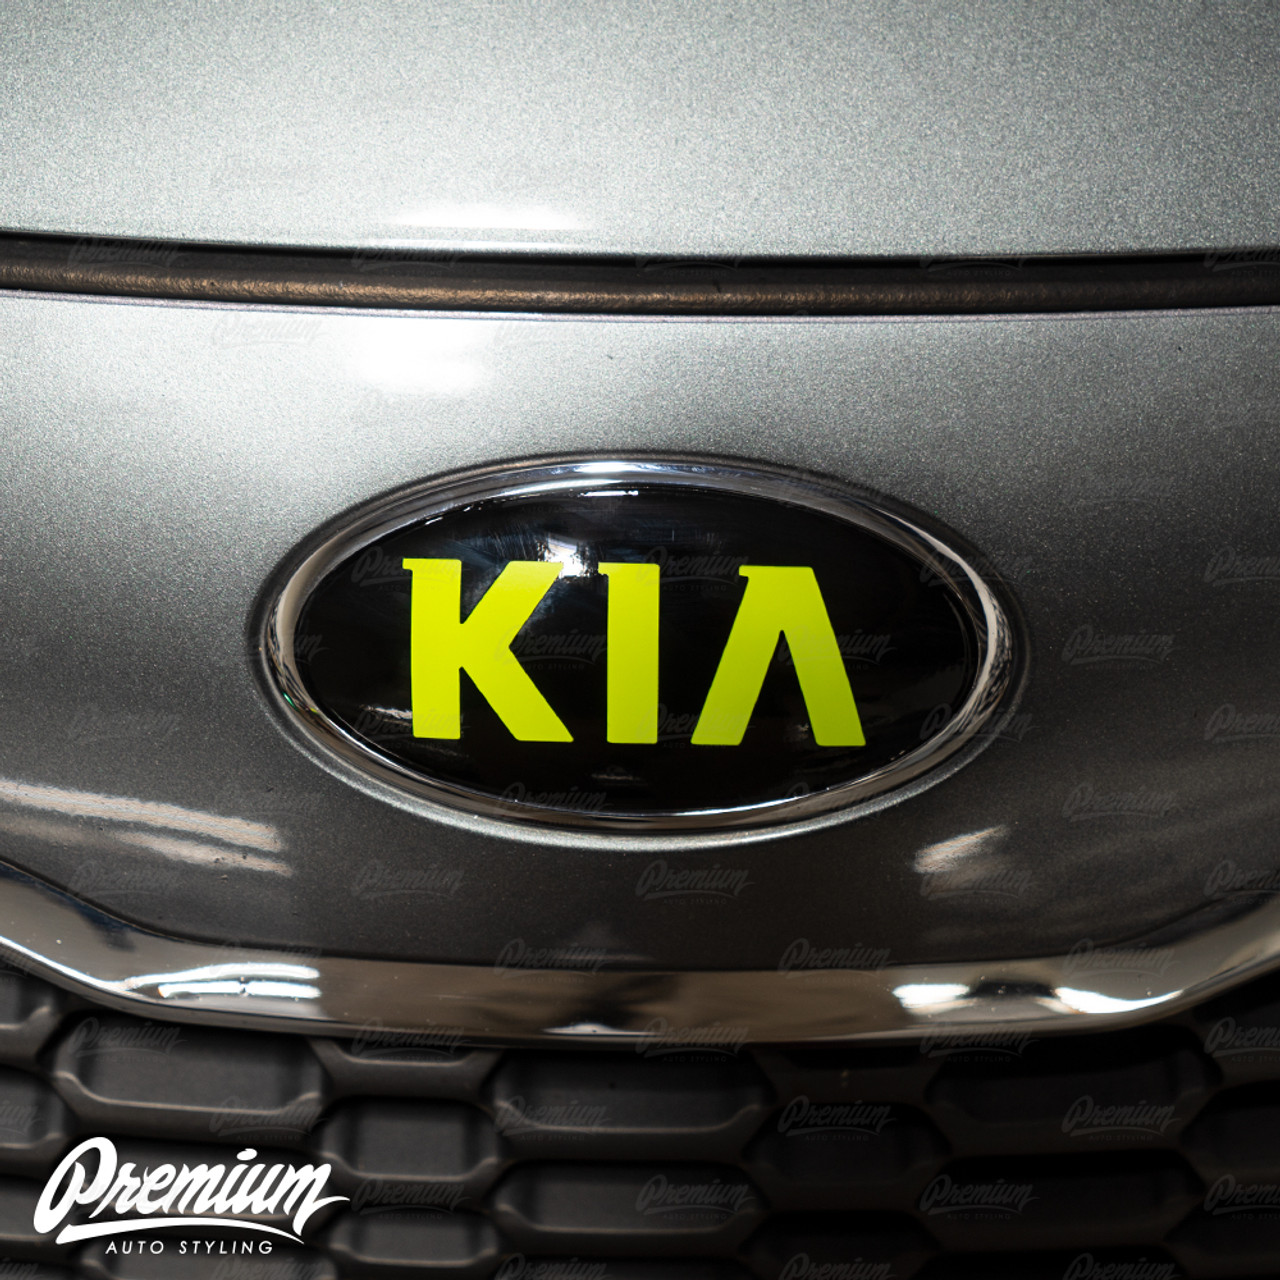 2014-2016 Kia Forte Hatchback  Front & Rear Emblem Vinyl Overlay Set -  Gloss Black Background with Logo Color of your Choice + Matching Steering  Wheel Emblem by Premium Auto Styling